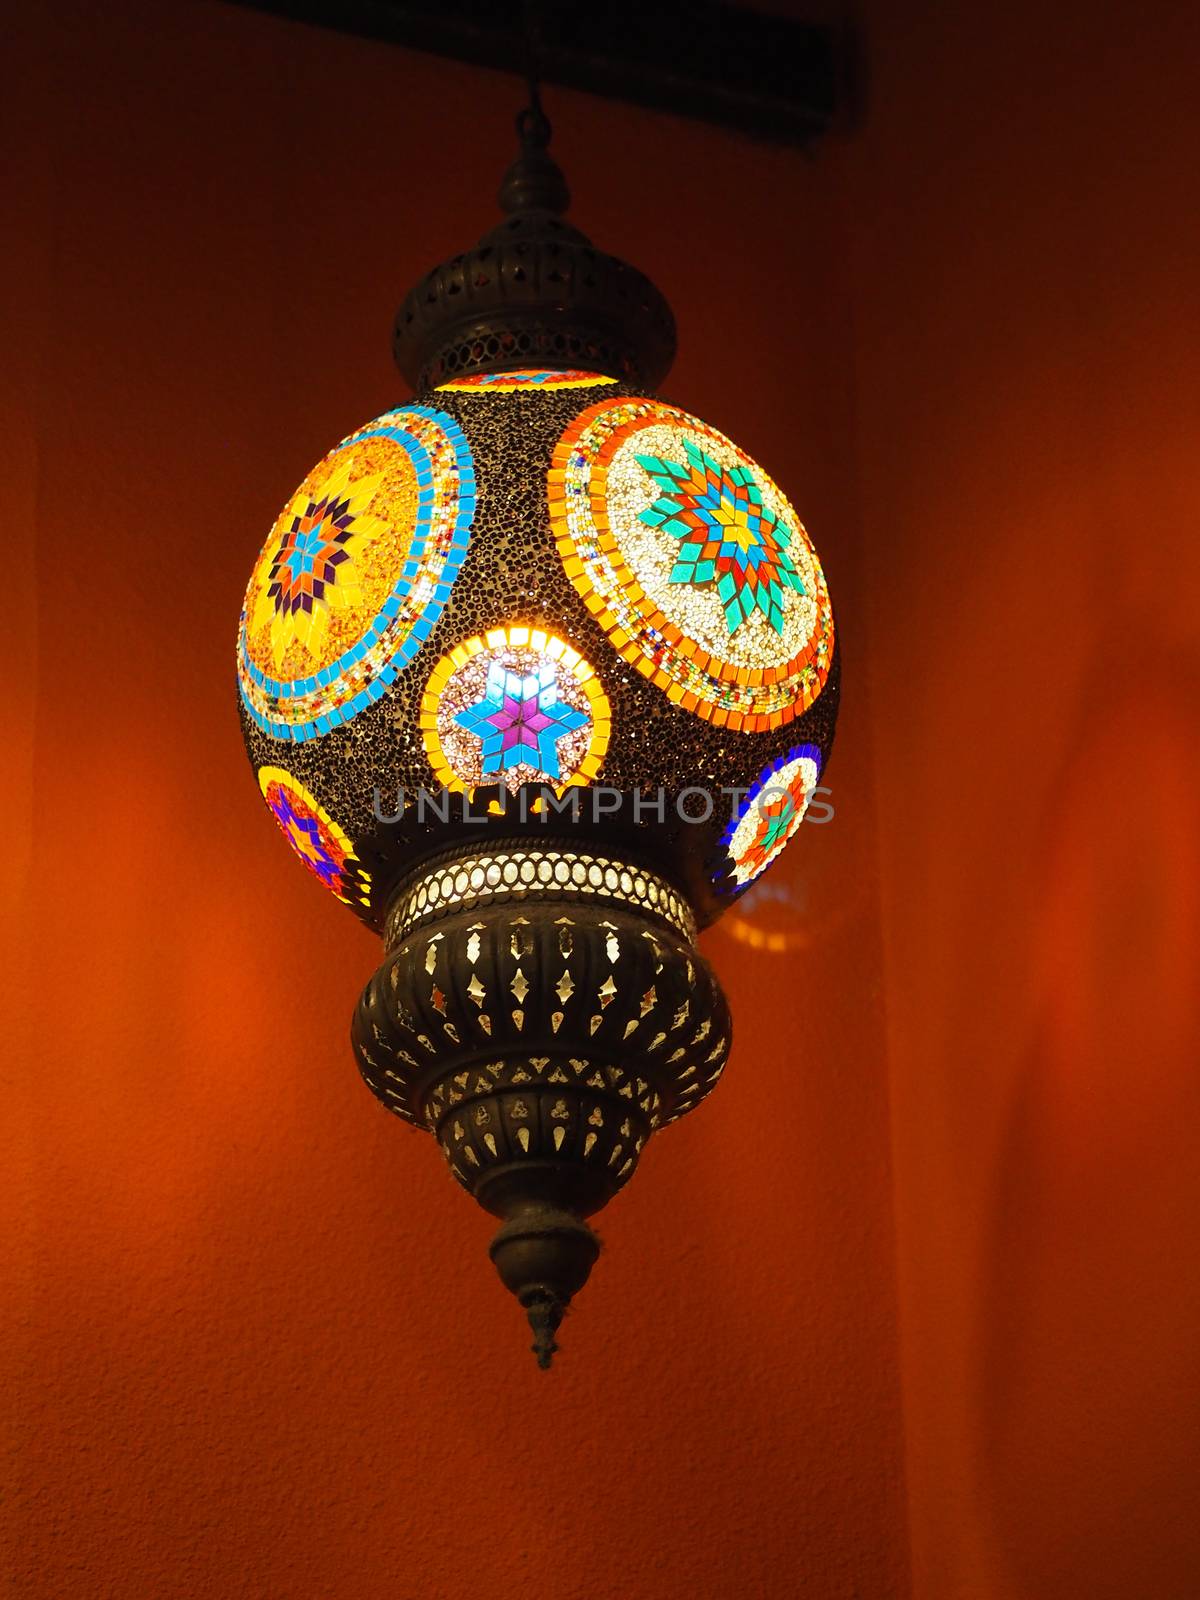 Ceiling light lamp traditional asia style. by gnepphoto